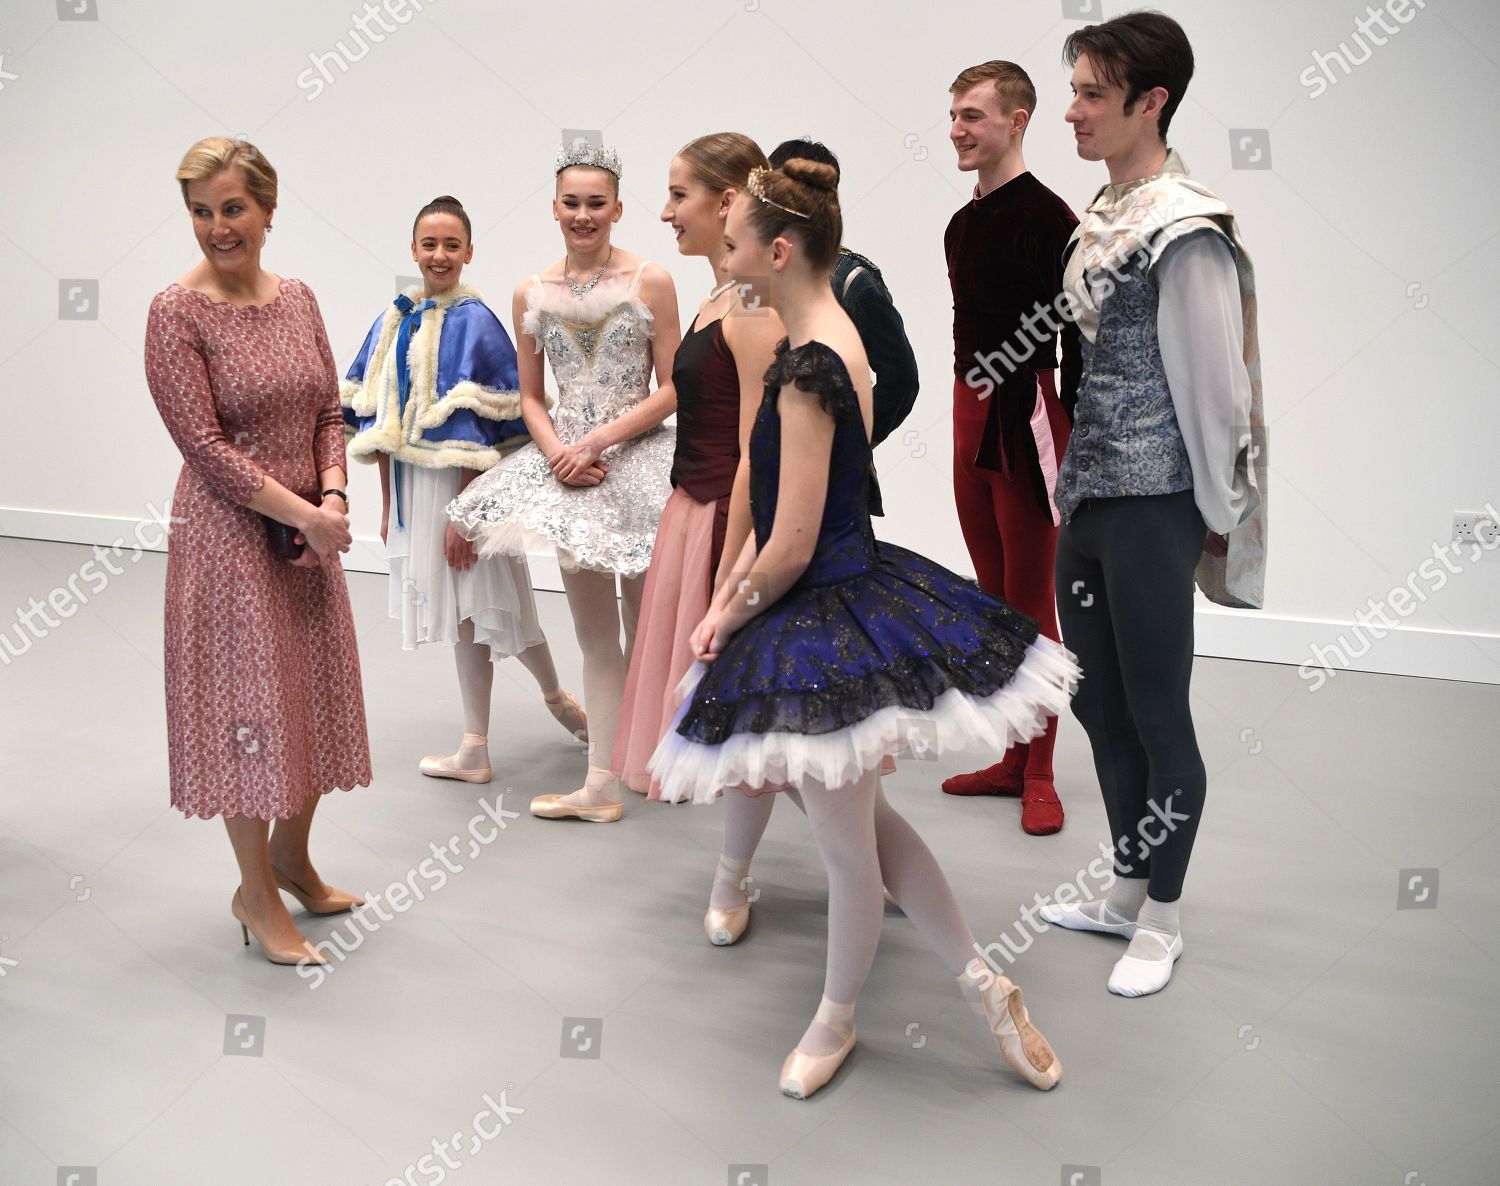 sophie-countess-of-wessex-opens-a-new-studio-for-central-school-of-ballet-london-uk-shutterstock-editorial-10568616h.jpg